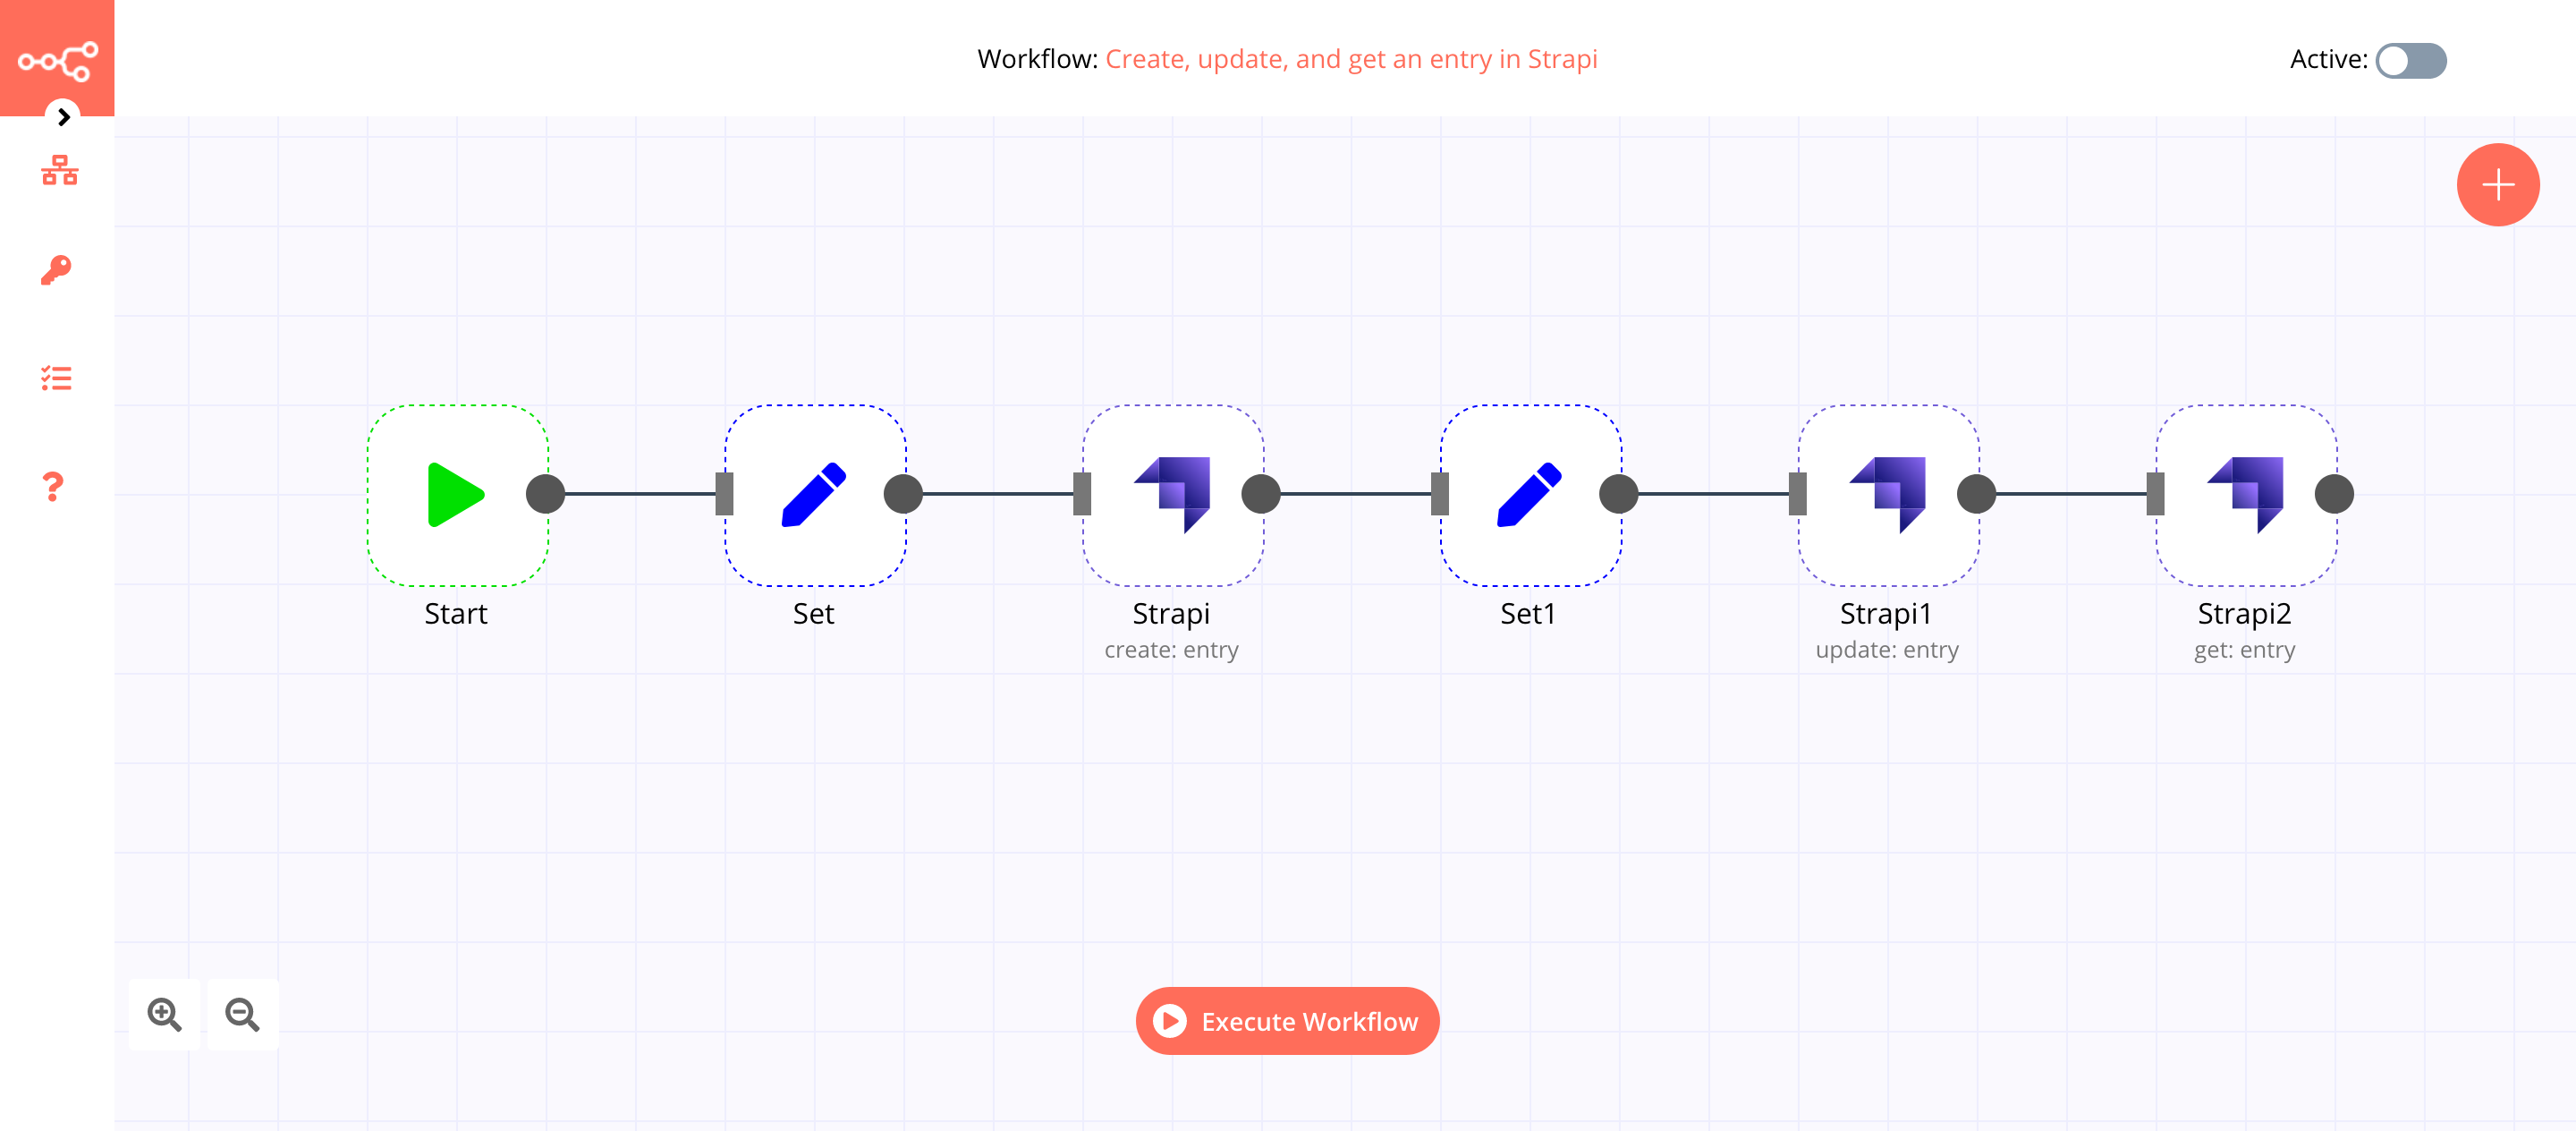 A workflow with the Strapi node